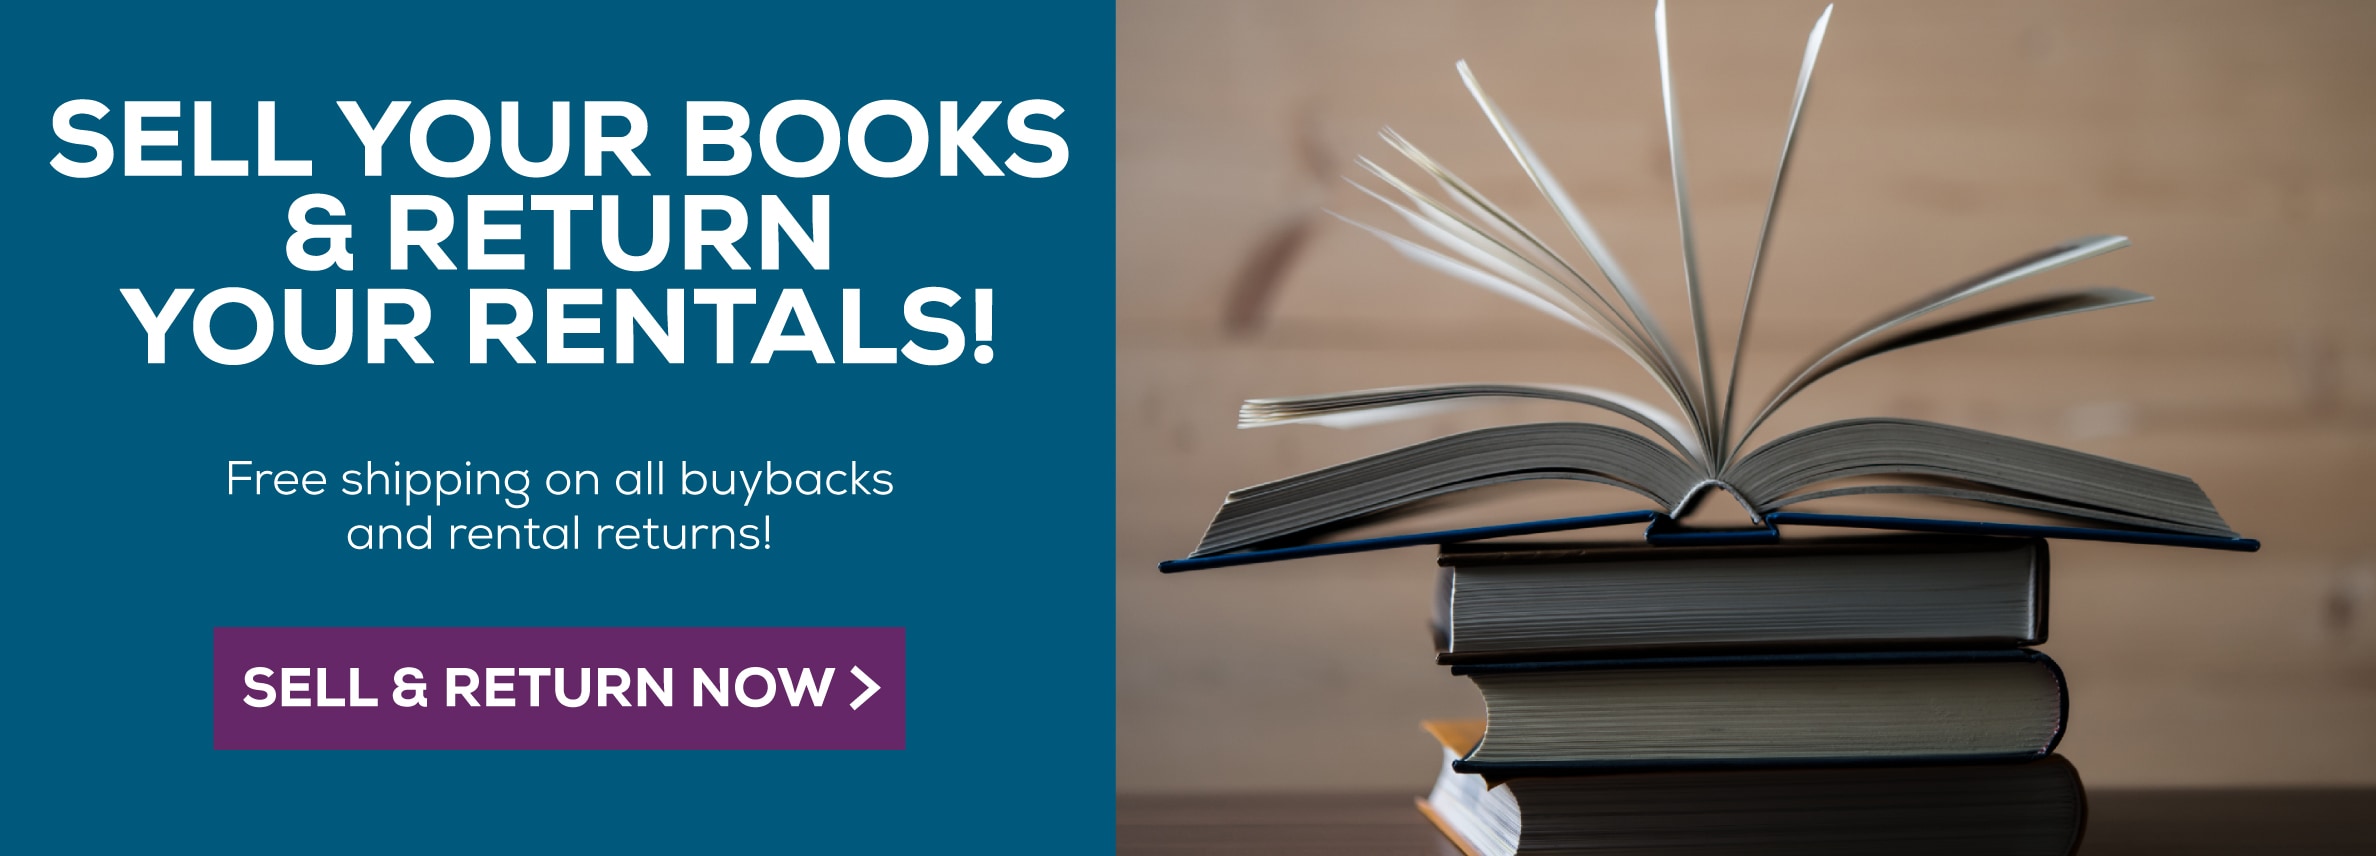 Sell your books and return your rentals! Free shipping on all buybacks and rental returns! Sell and return now!